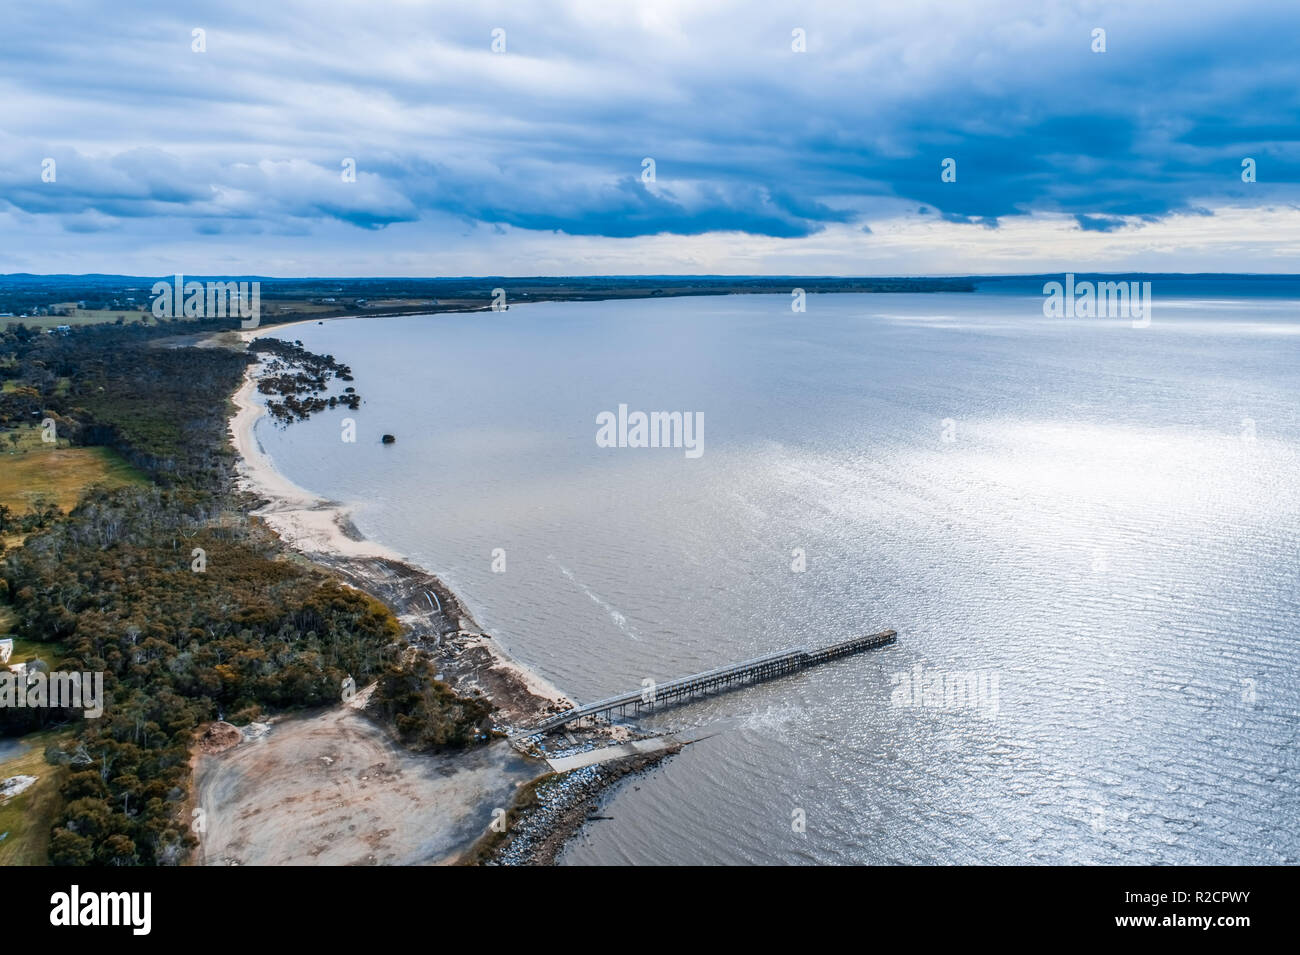 Long pier and ocean coastline with mangroves Stock Photo